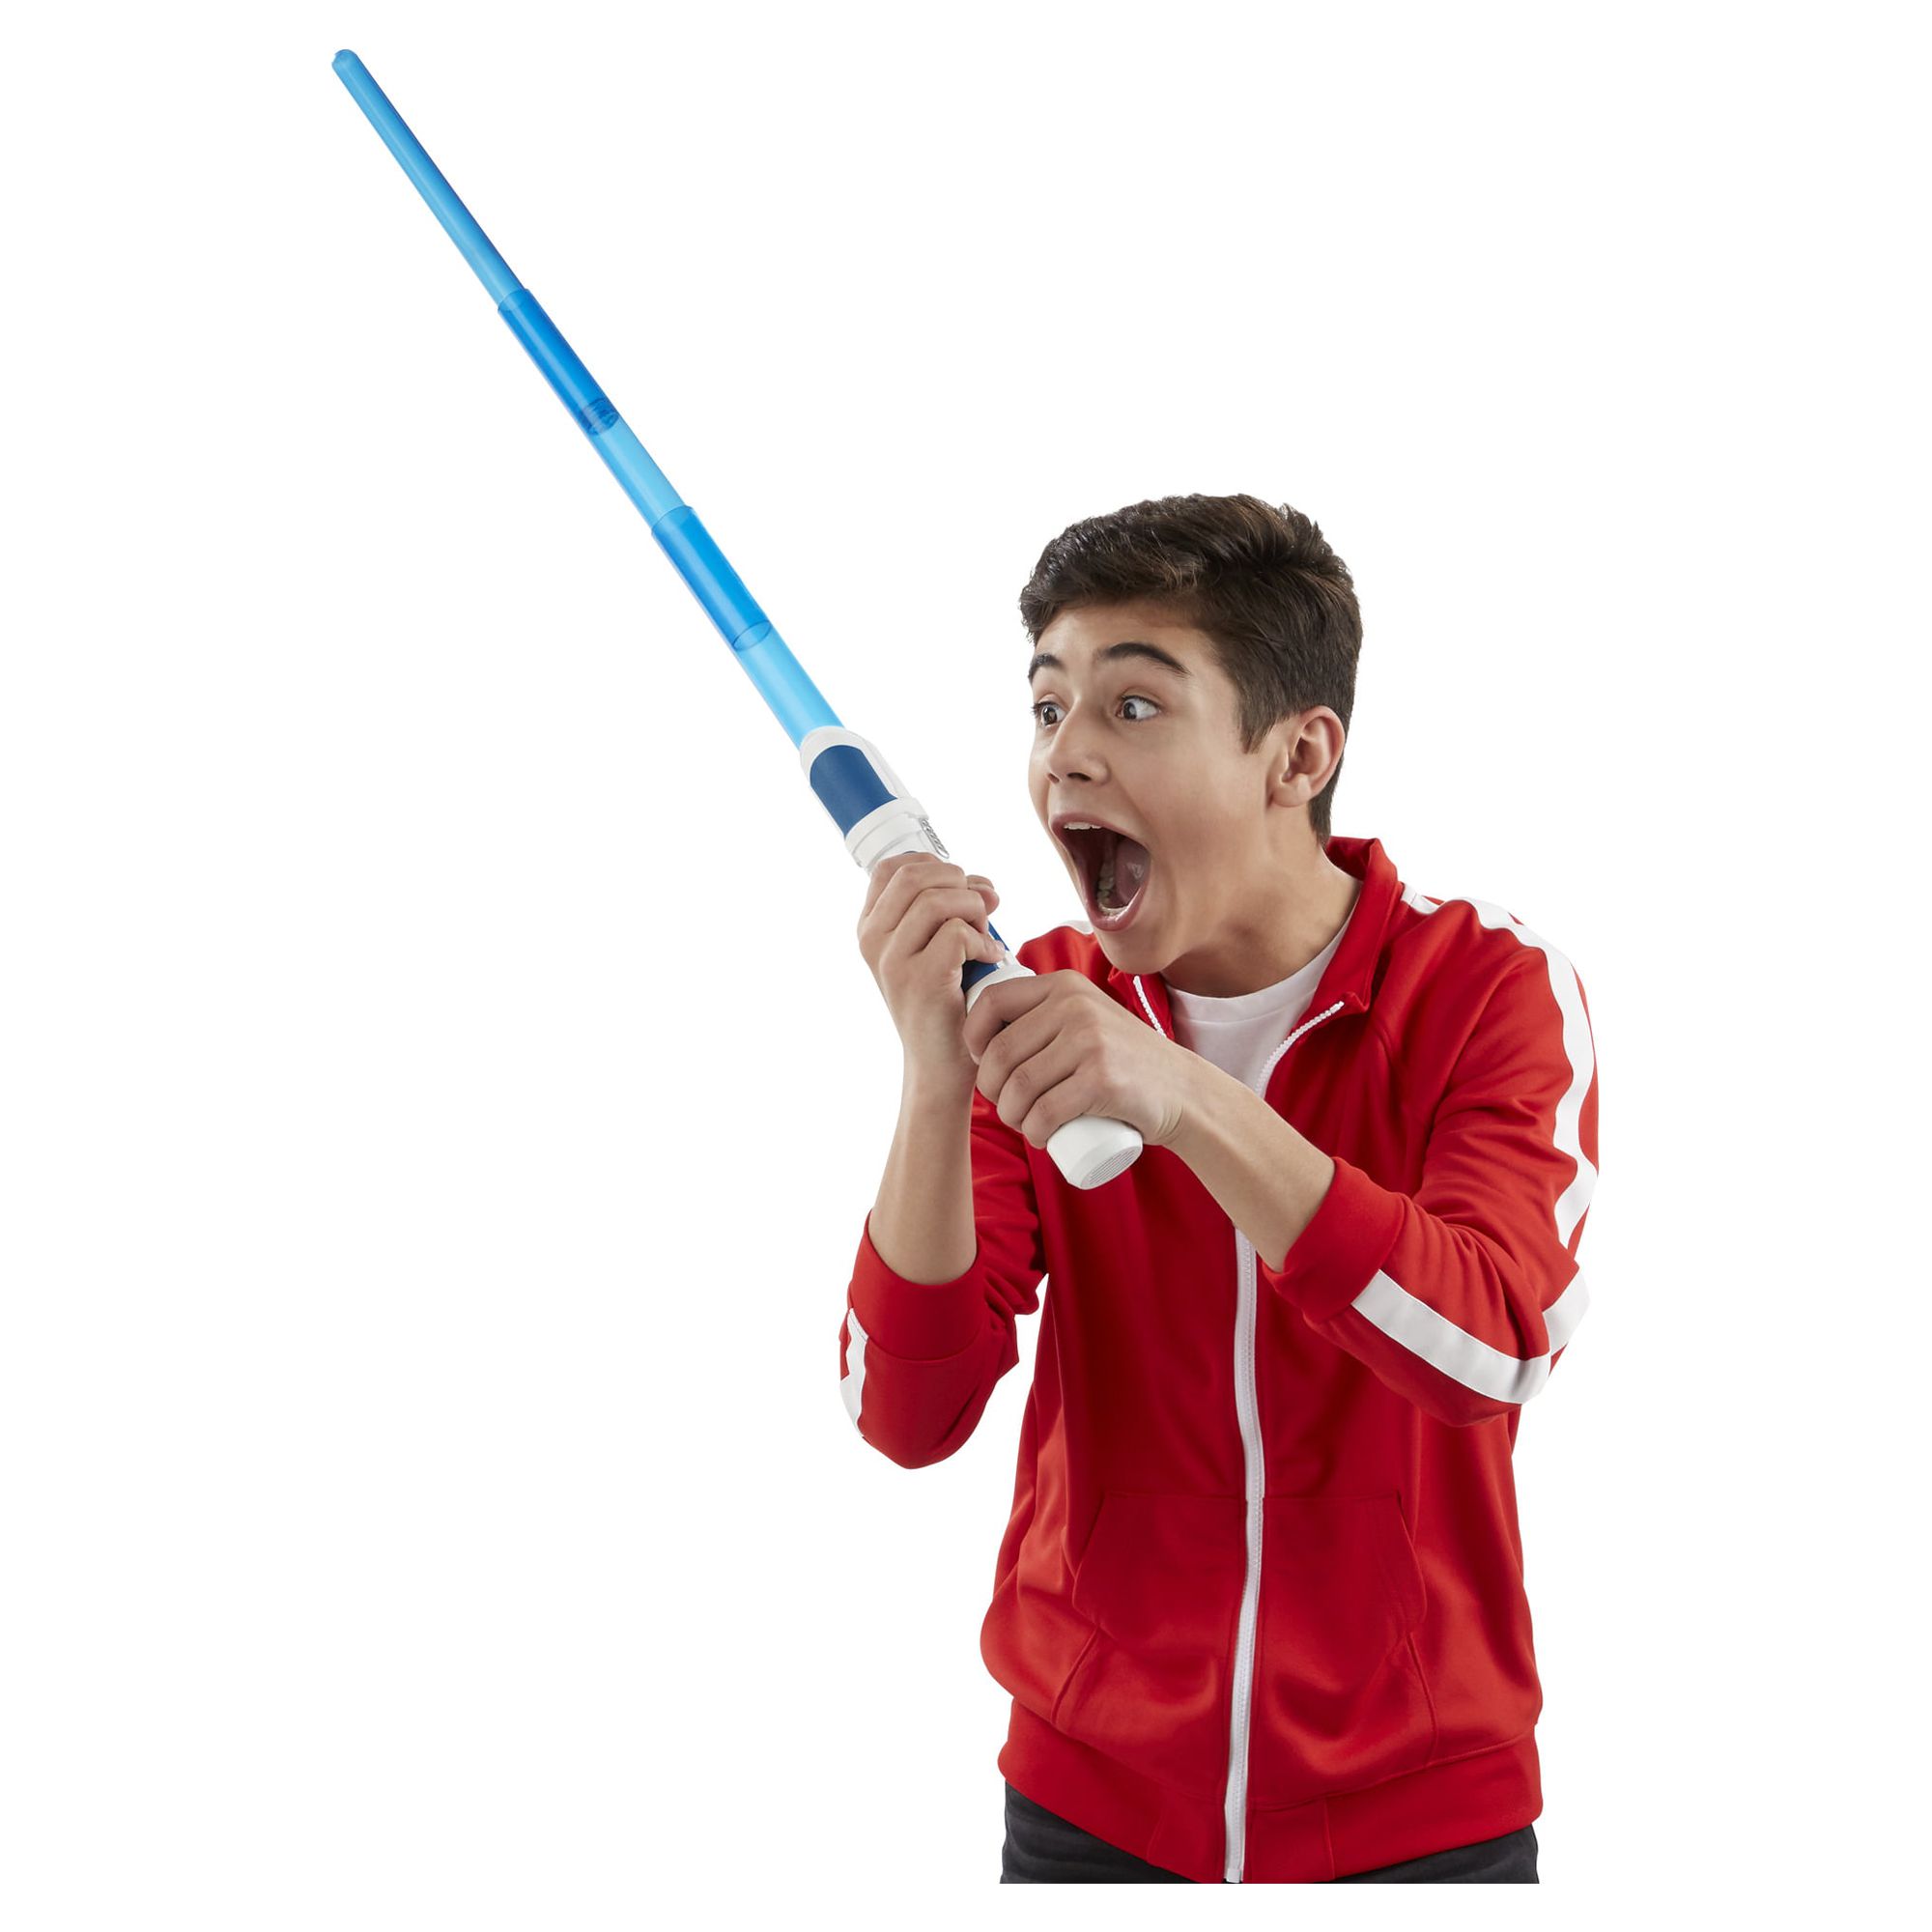 Star Wars Scream Saber Lightsaber Electronic Roleplay Toy - image 11 of 11